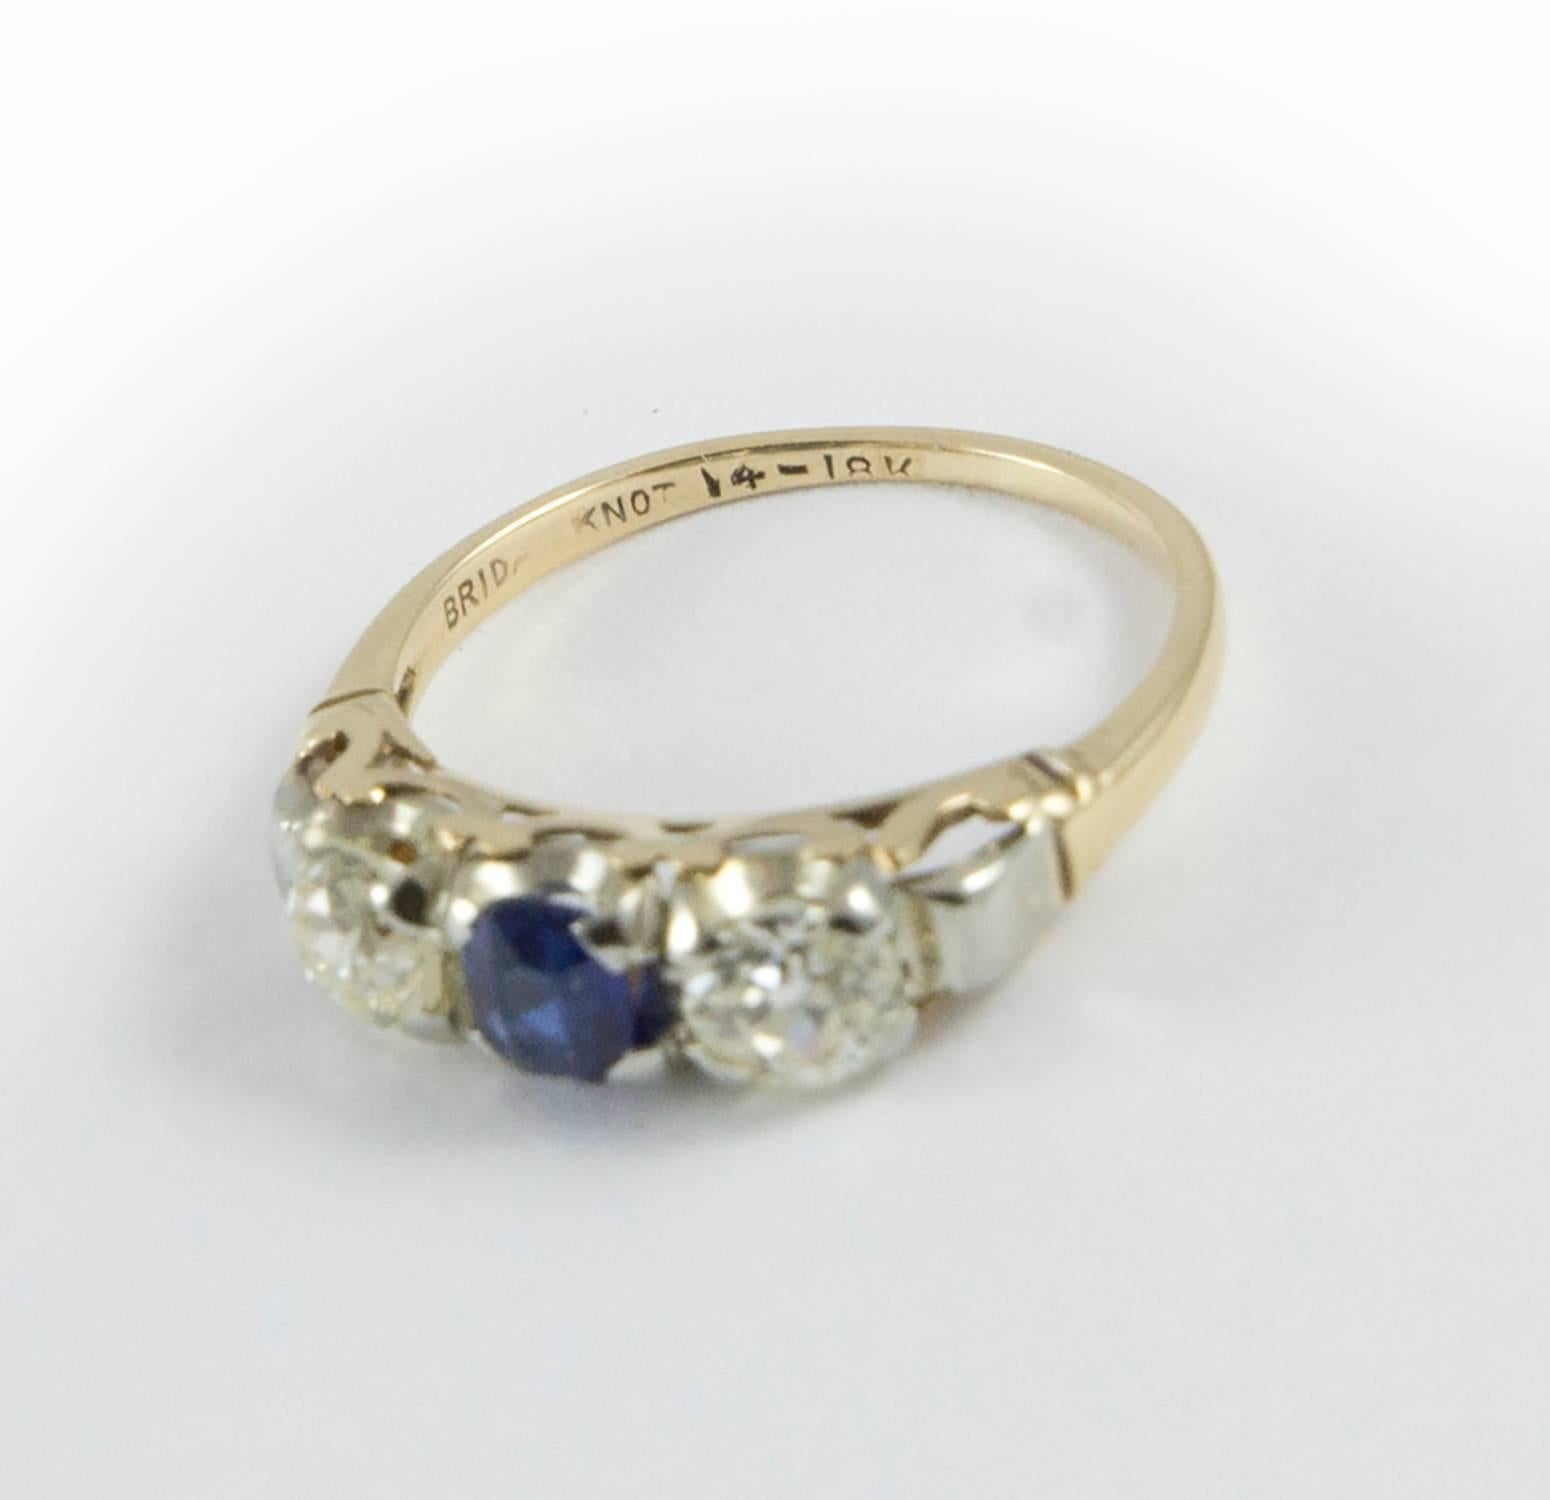 Vintage Gold Diamond and Sapphire Ring In Excellent Condition For Sale In Toronto, Ontario